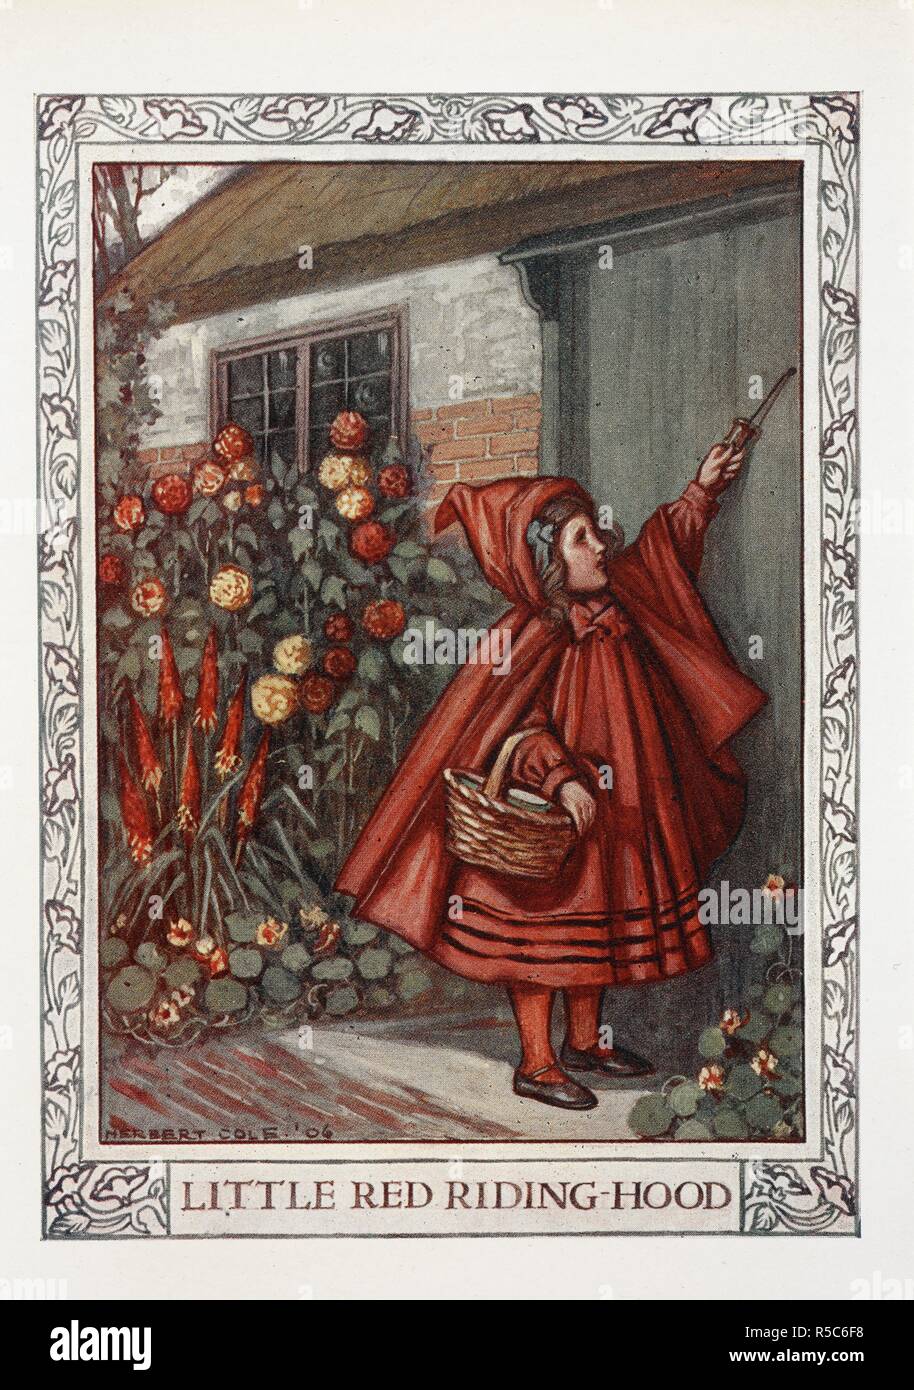 Little Red Riding Hood. Fairy-Gold: a book of old English fairy tales, chosen by Ernest Rhys, illustrated by Herbert Cole. London : J. M. Dent & Co., 1906. Source: 12411.d.22 facing 300. Stock Photo